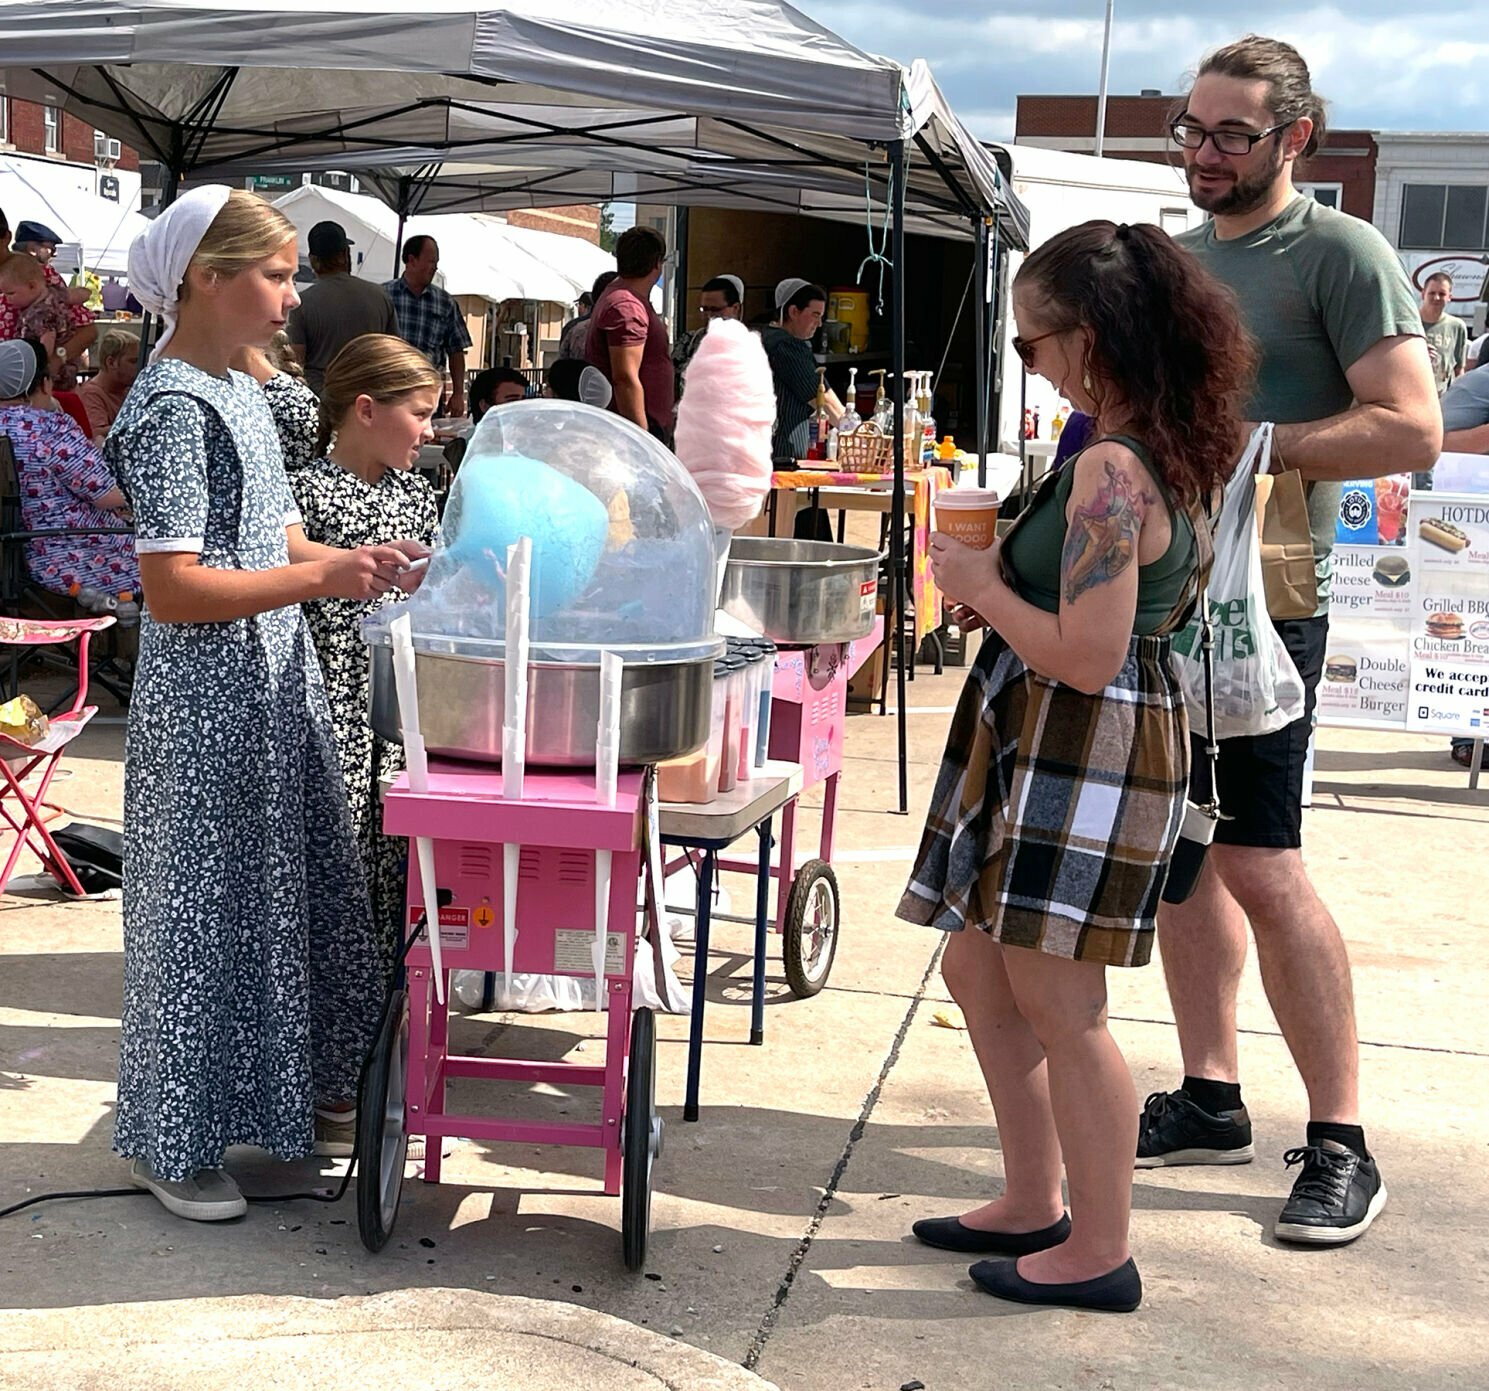 A shopper waits for her cotton candy to be made at the Red Barn Arts and Crafts Festival.